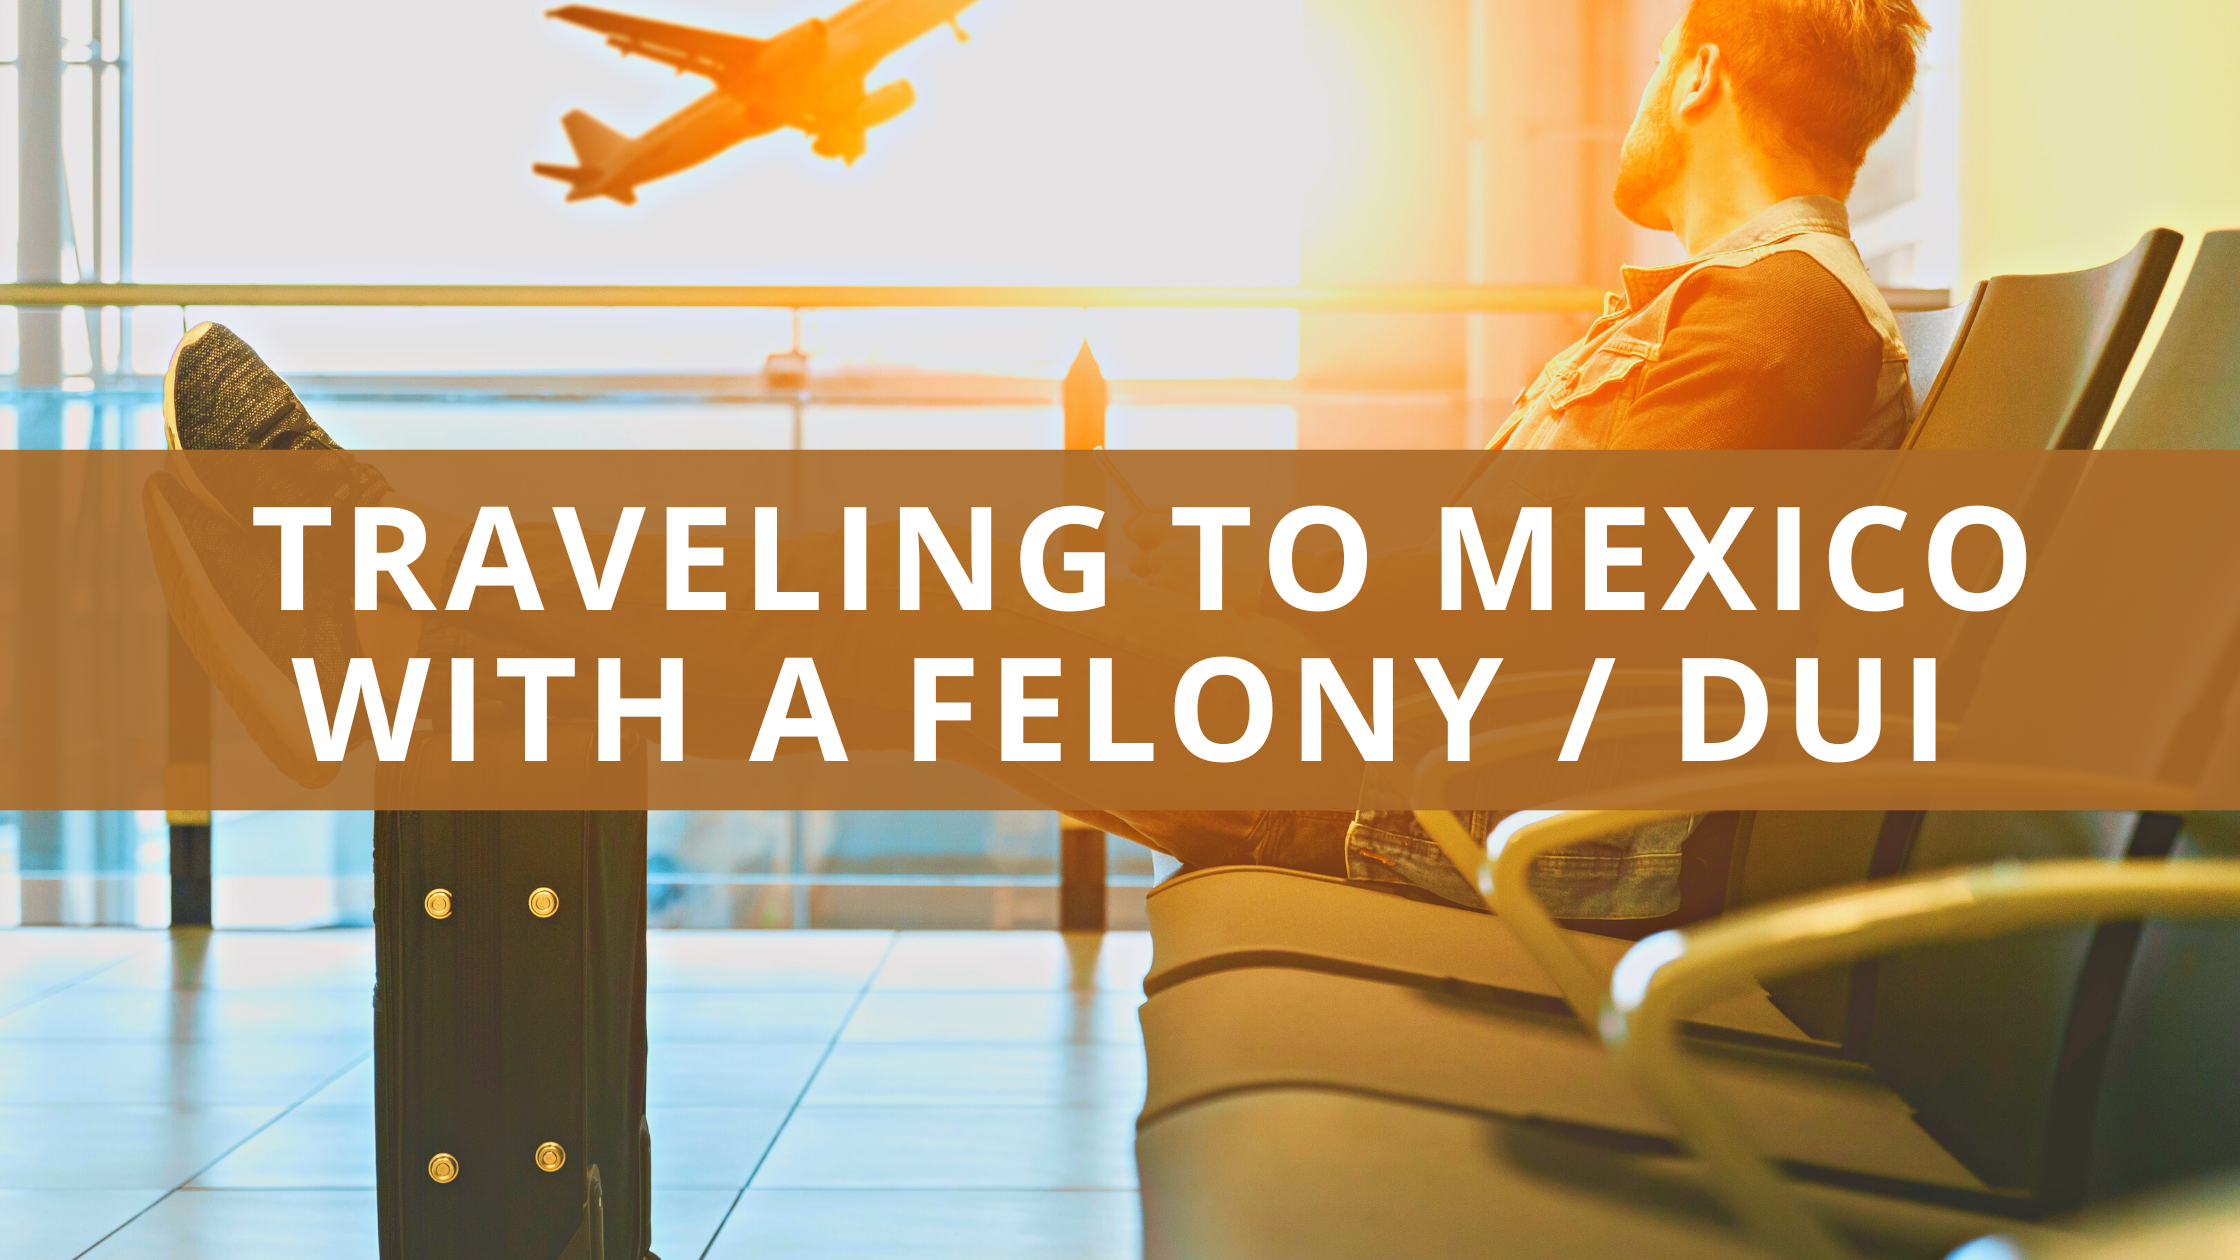 Can You Travel to Mexico With a DUI, Felony, or Criminal Record?